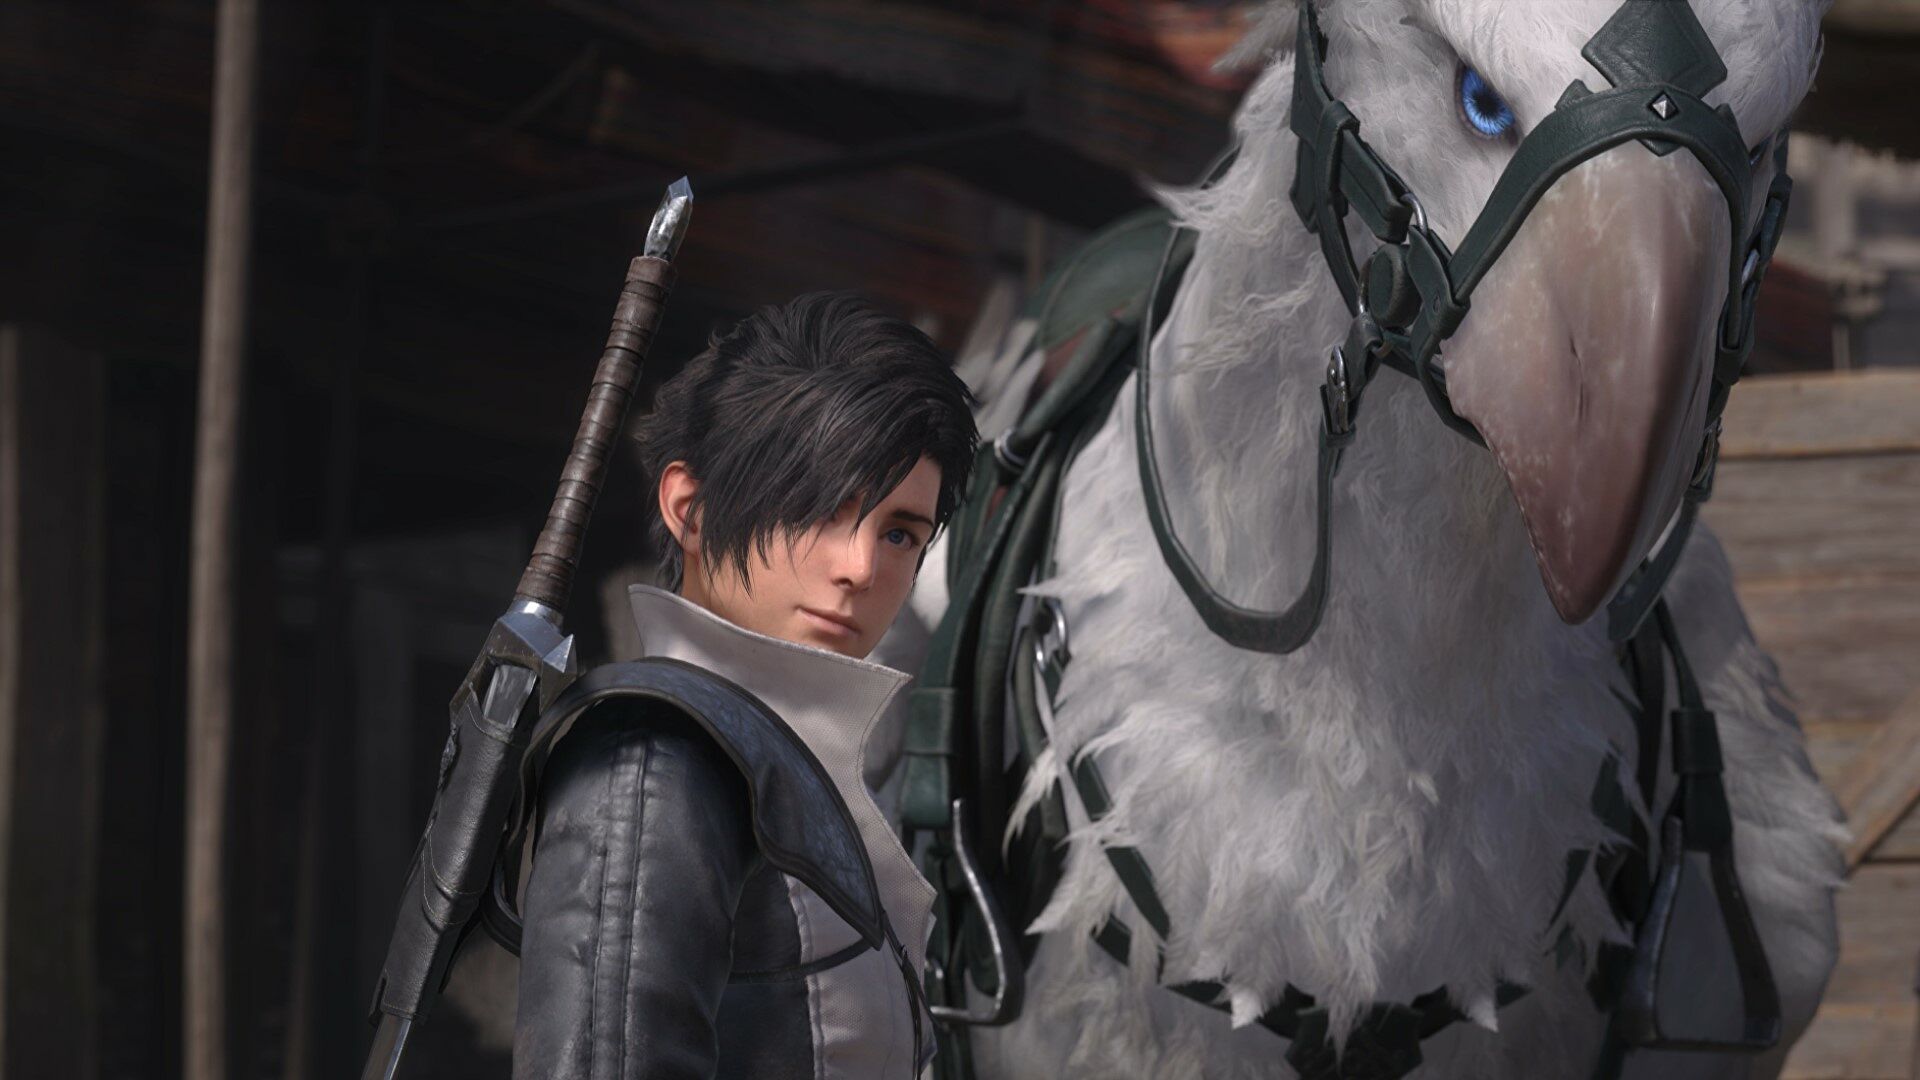 Final Fantasy 16's producer said every wrong thing when asked about the game's diversity